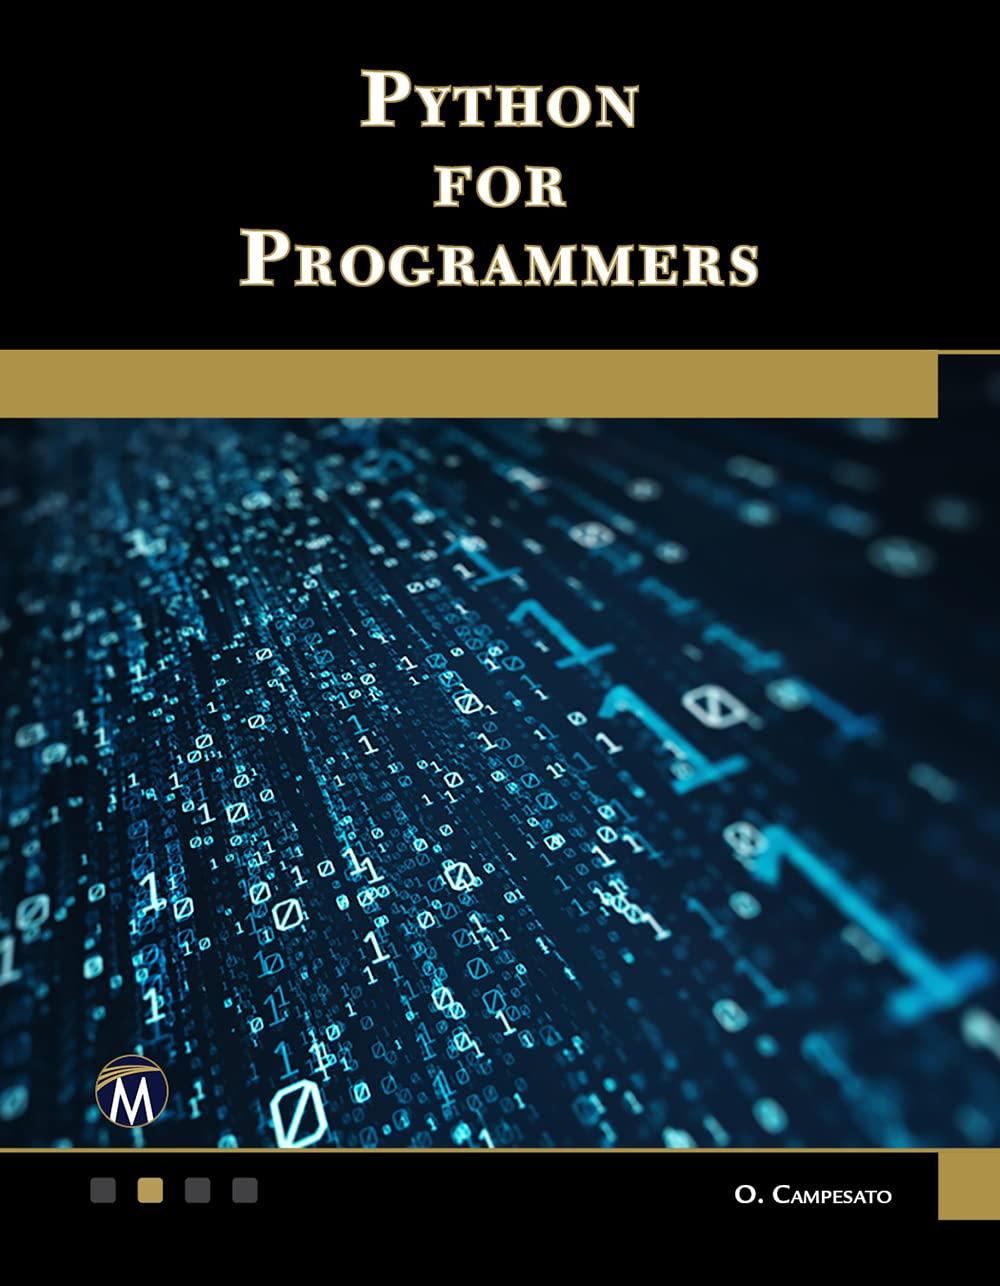 python for programmers 1st edition oswald campesato 1683928172, 978-1683928171